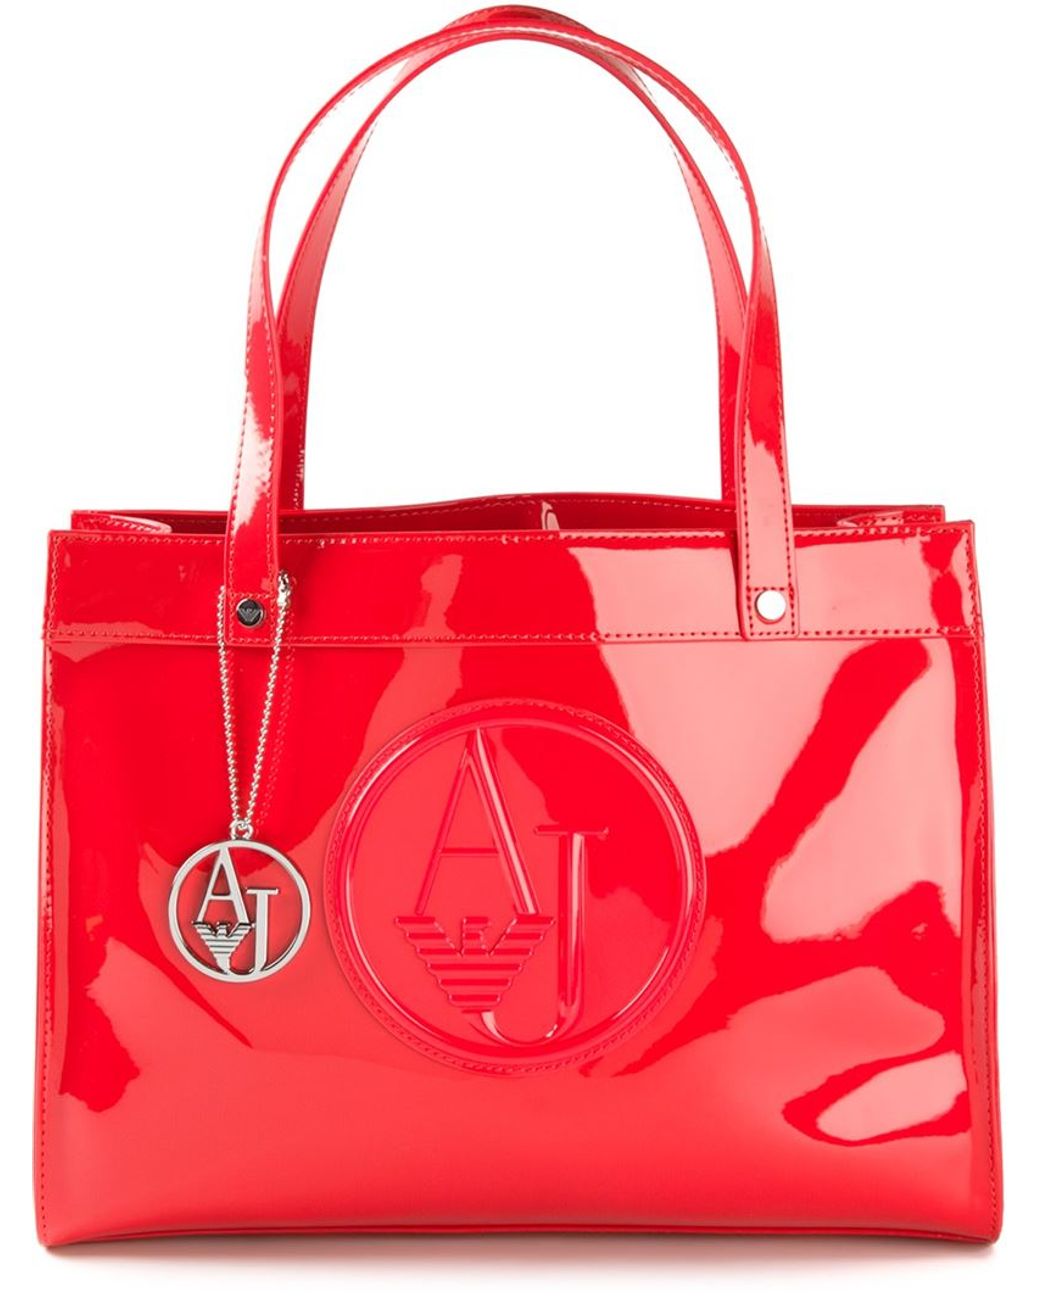 Armani Jeans Embossed Tote Bag in Red | Lyst